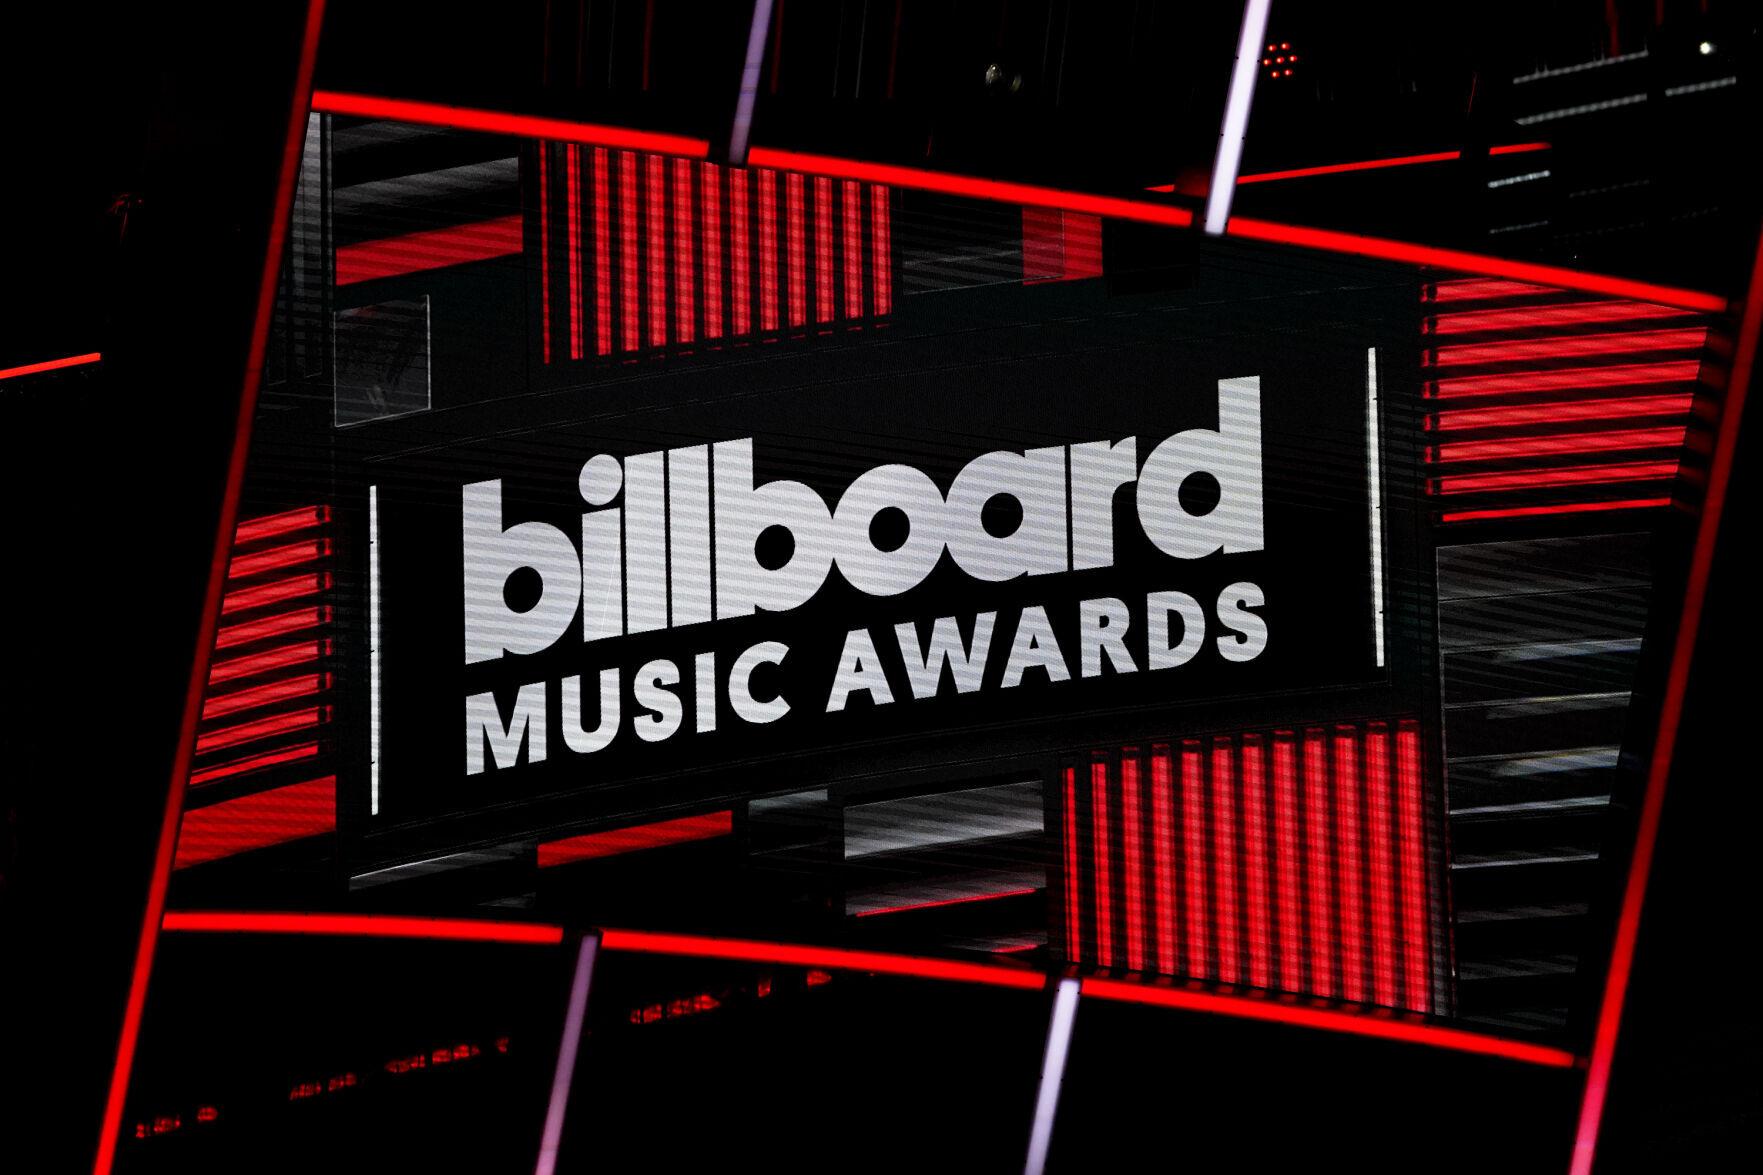 Here's the full list of winners from the 2020 Billboard Music Awards